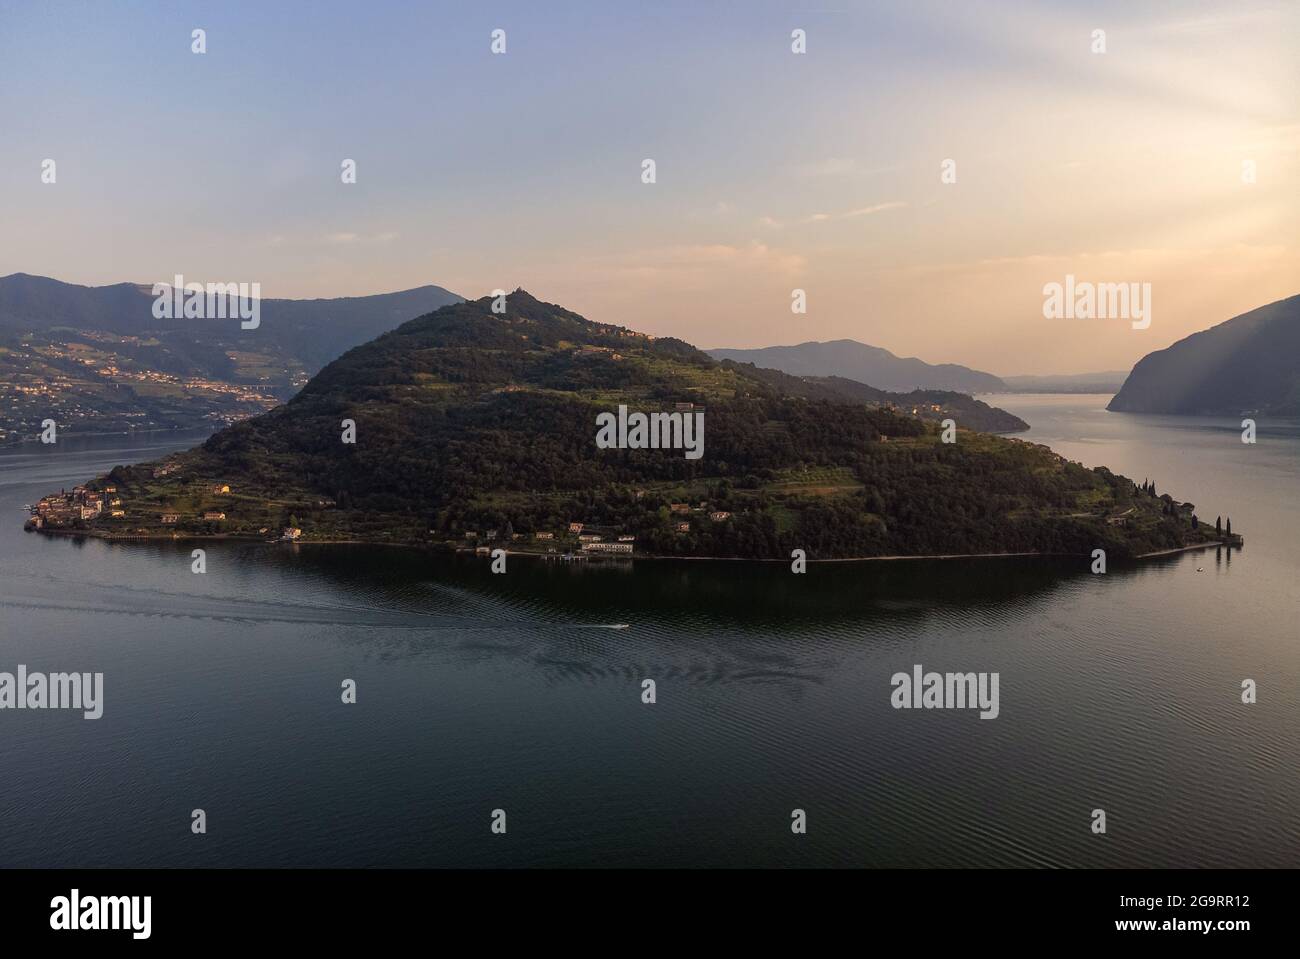 Aerial panoramic view of Lake Iseo and Monte Isola at sunset, Lombardy, Italy Stock Photo